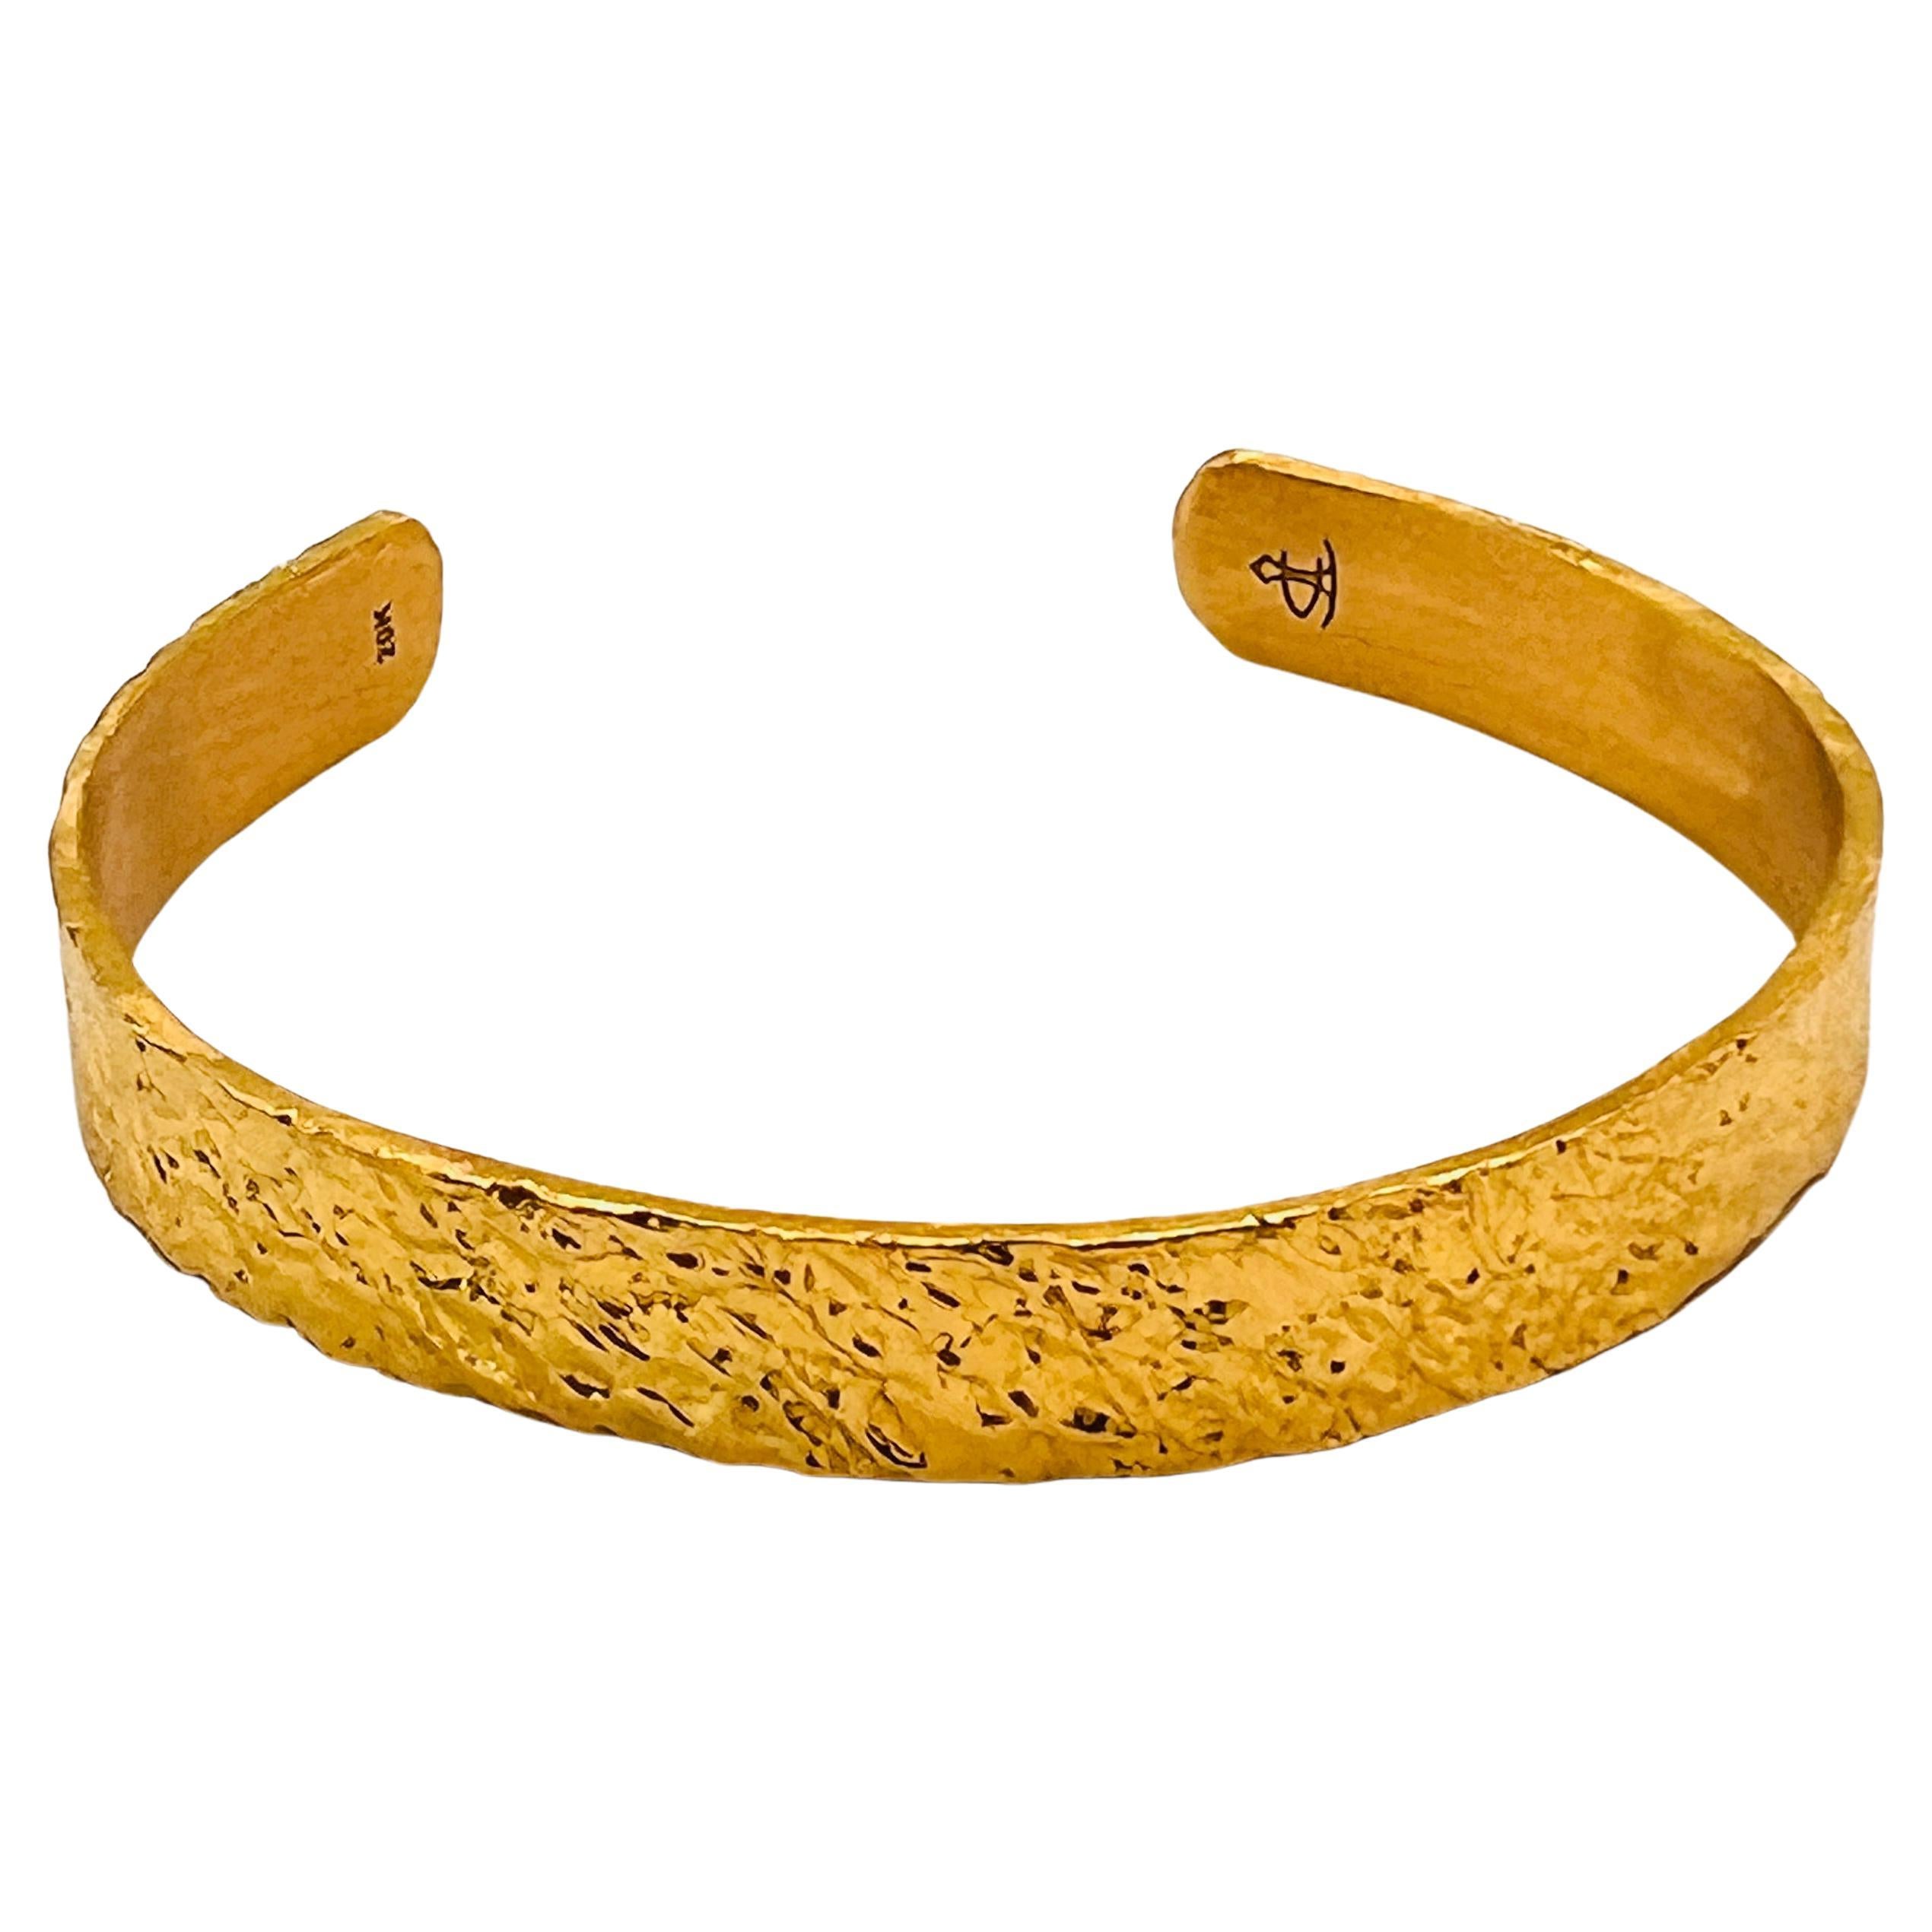 20k Gold Customized Engraved Cuff, by Tagili For Sale